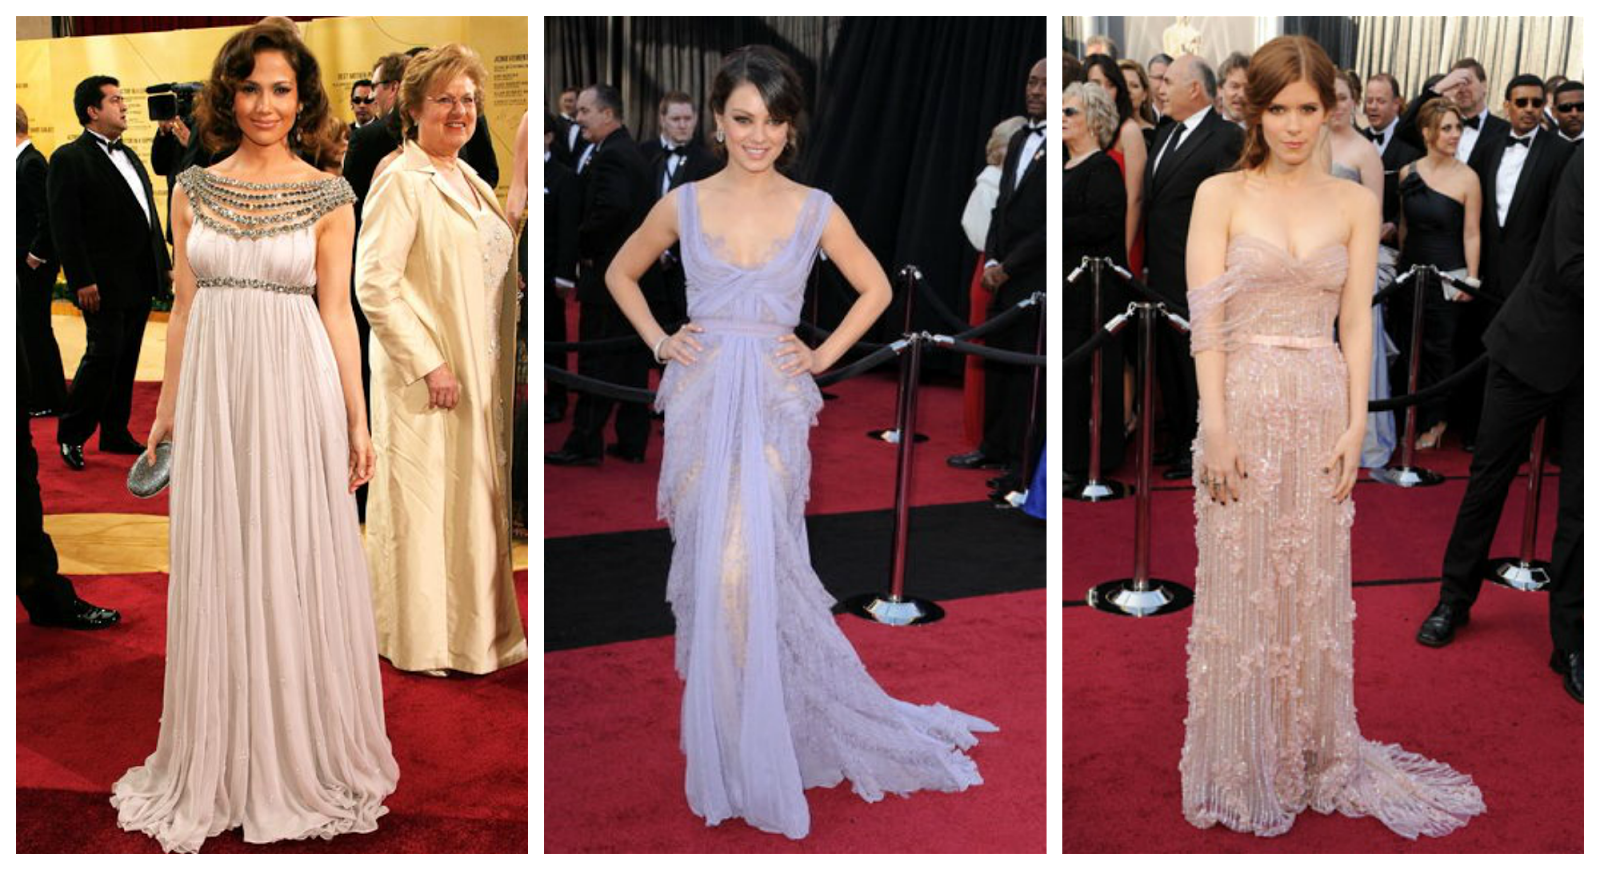 My Favorite Things: Oh Those Gowns! // Red Carpet Favorites Past & Present